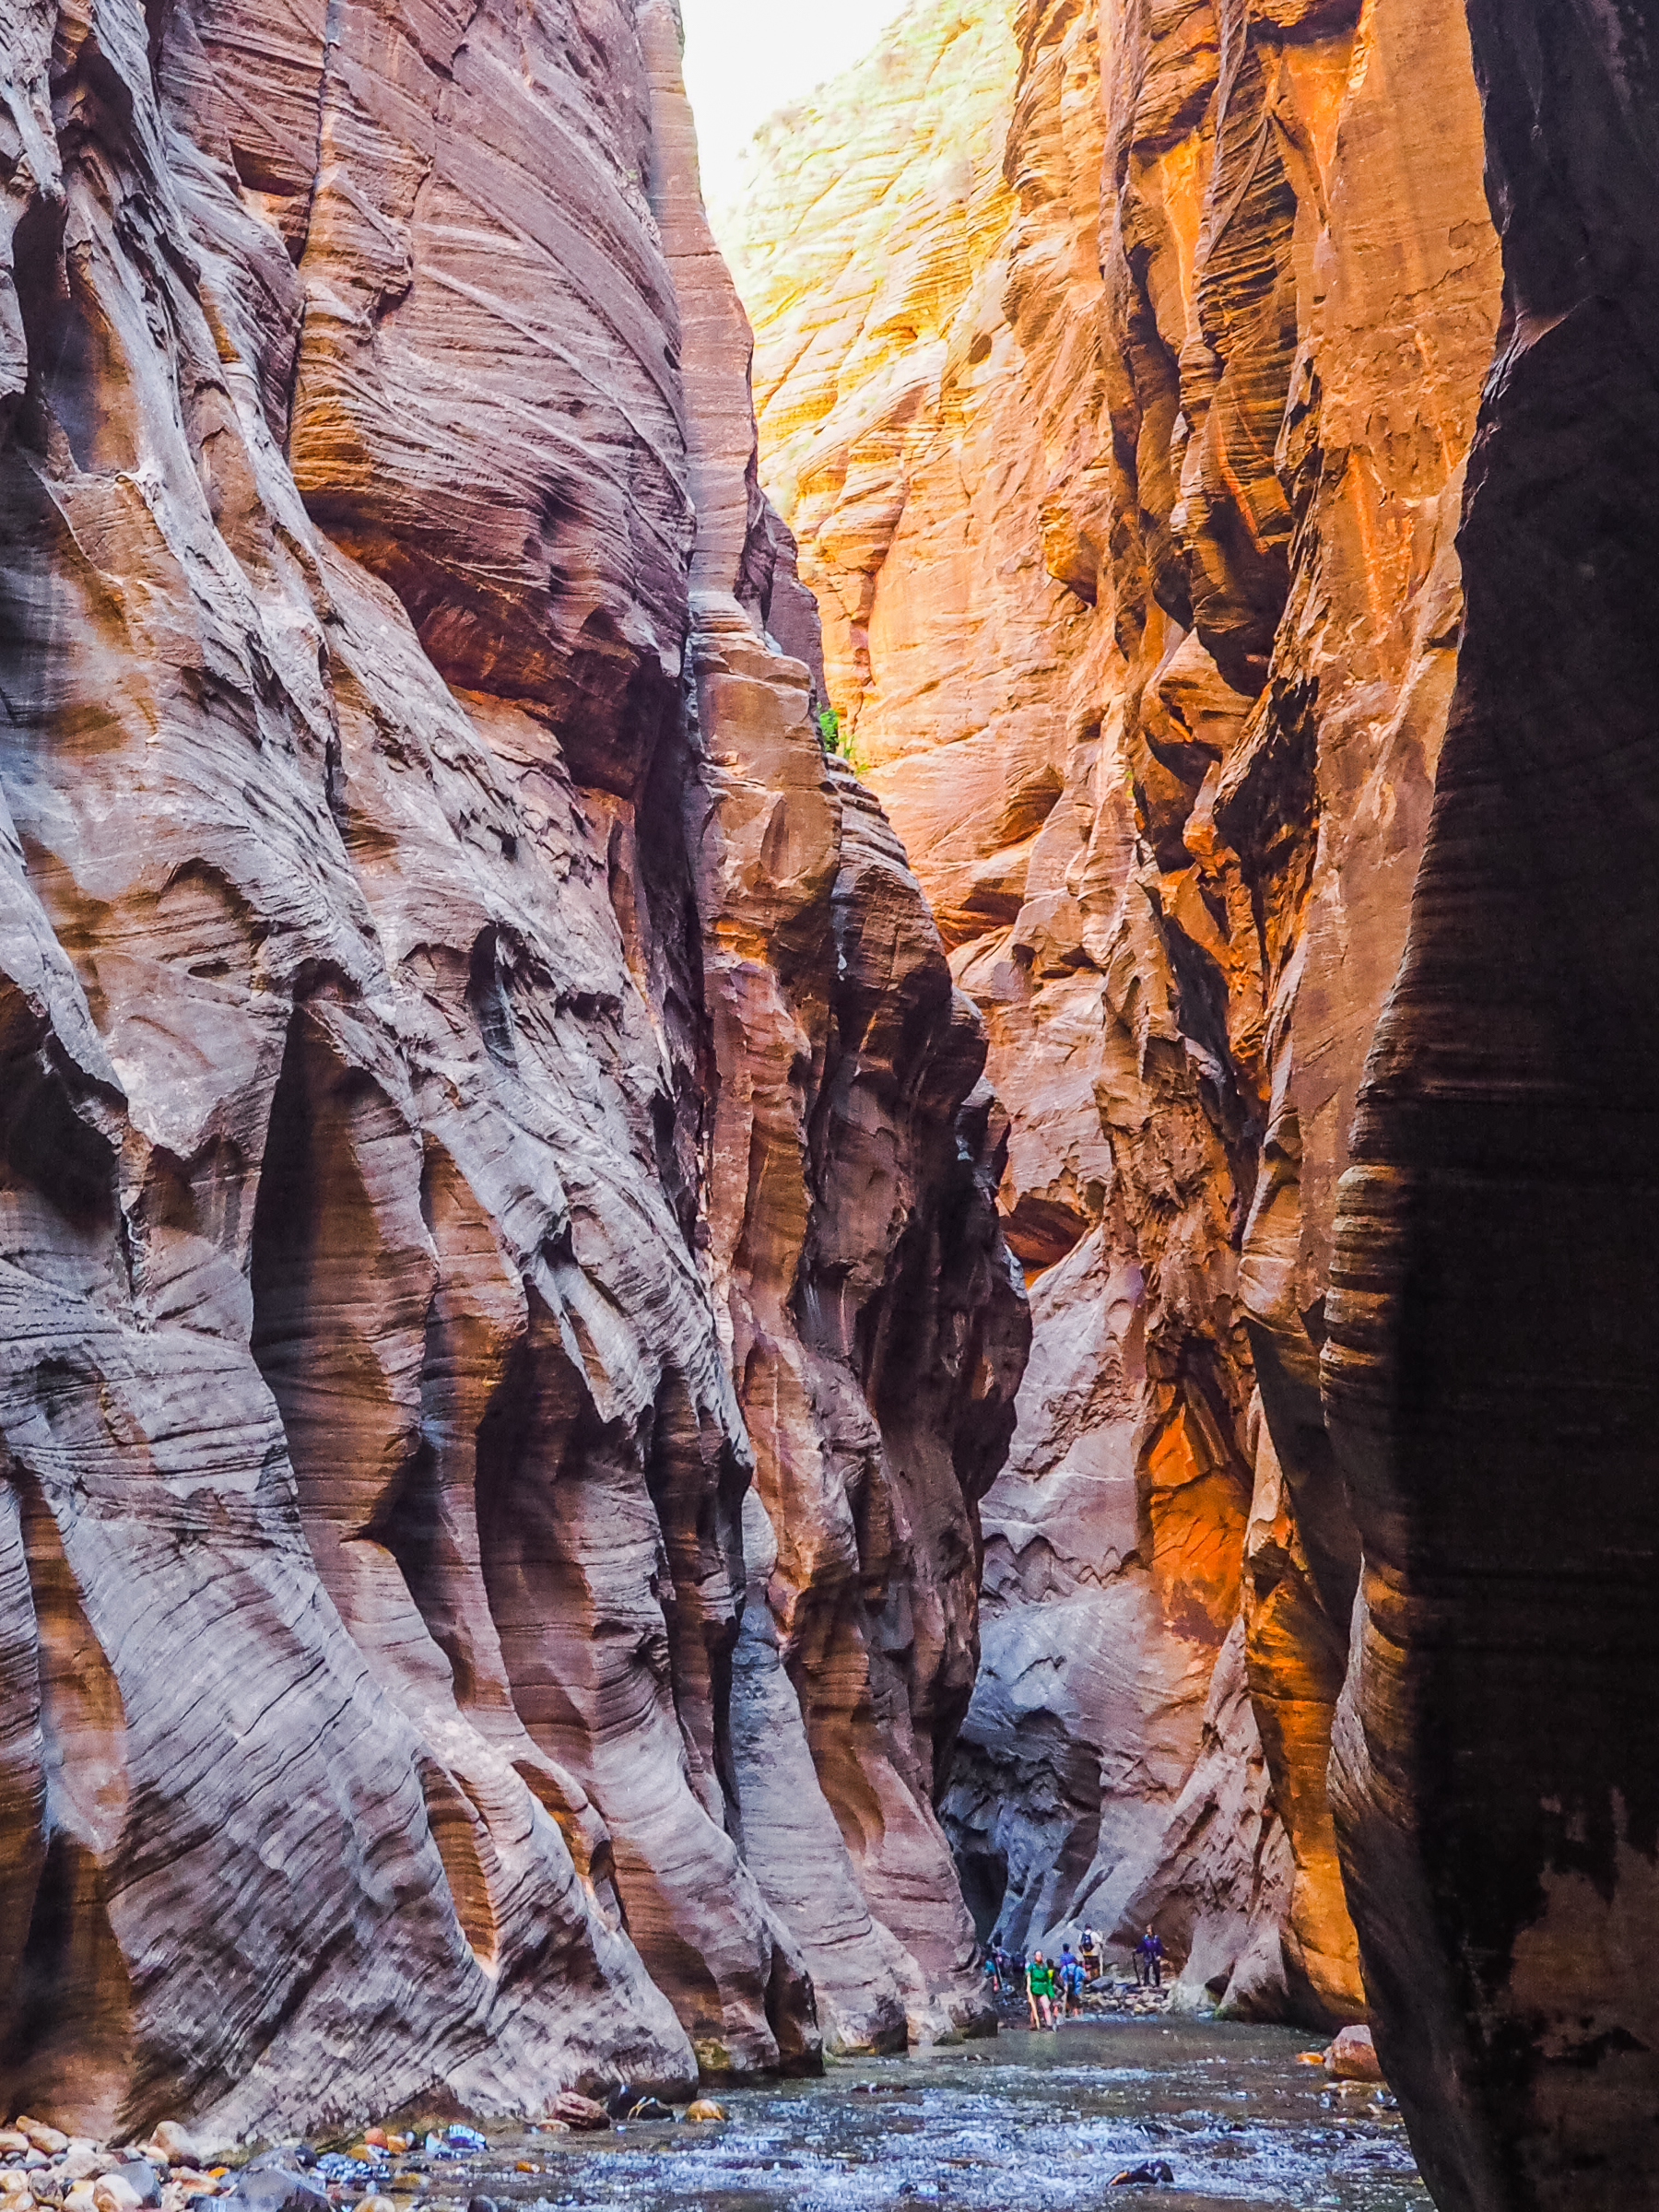 Surrounded by the high canyon walls while hiking The Narrows in Zion National Park